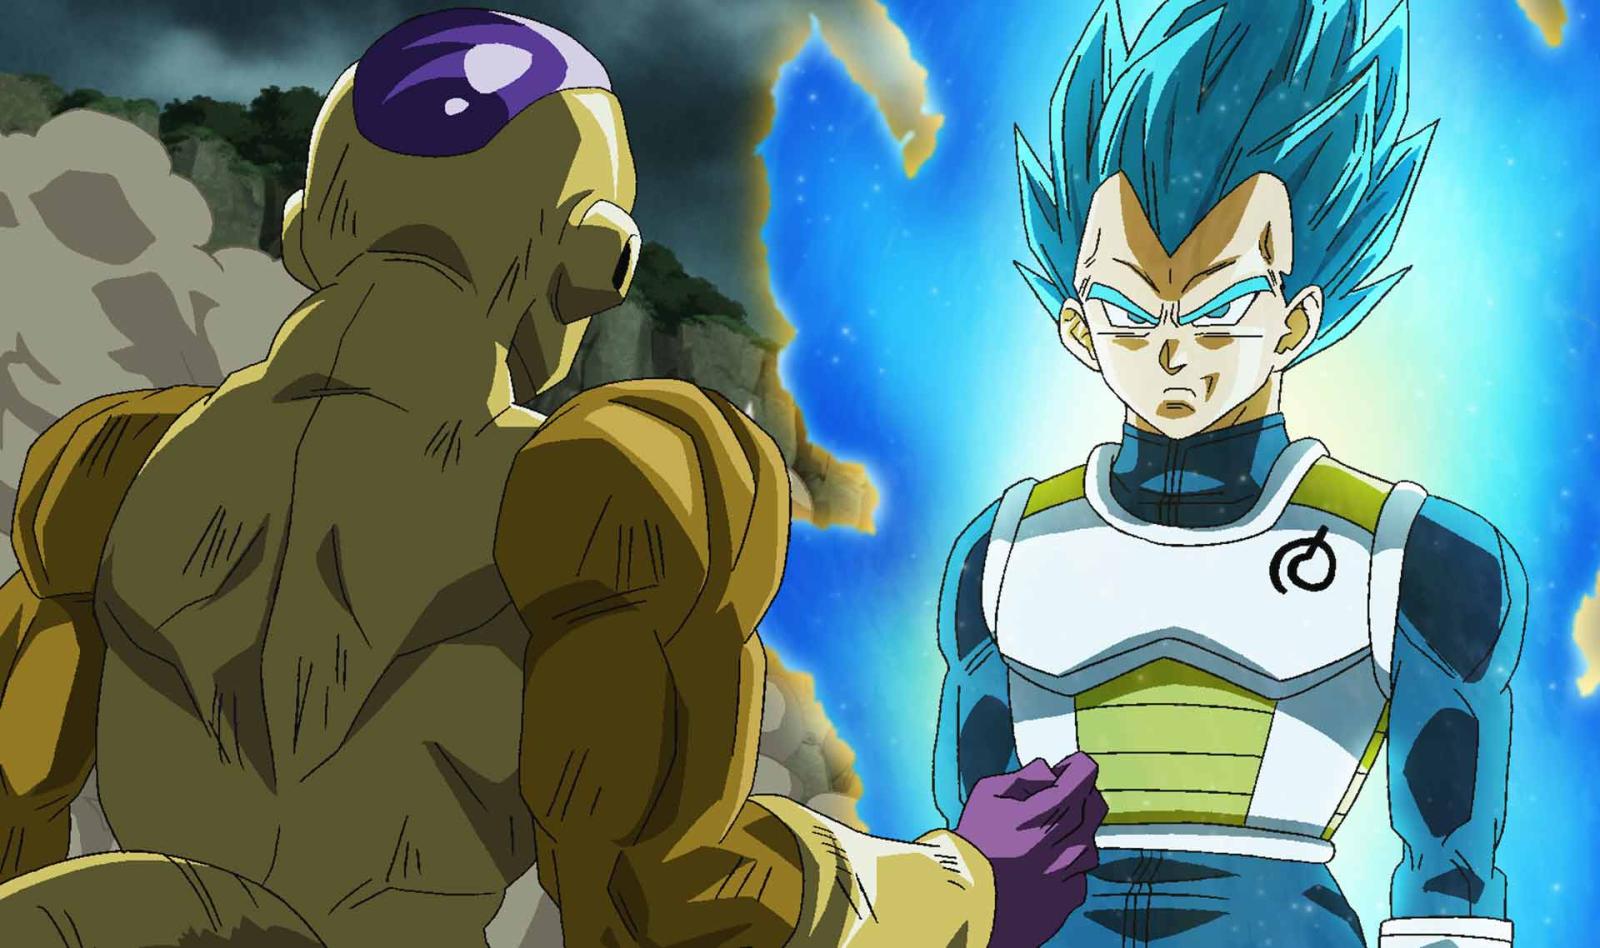 Dragon Ball Super - Volume 3 - Limited Edition 2 Blu-ray + Card + Booklet (Blu-ray) Image 3